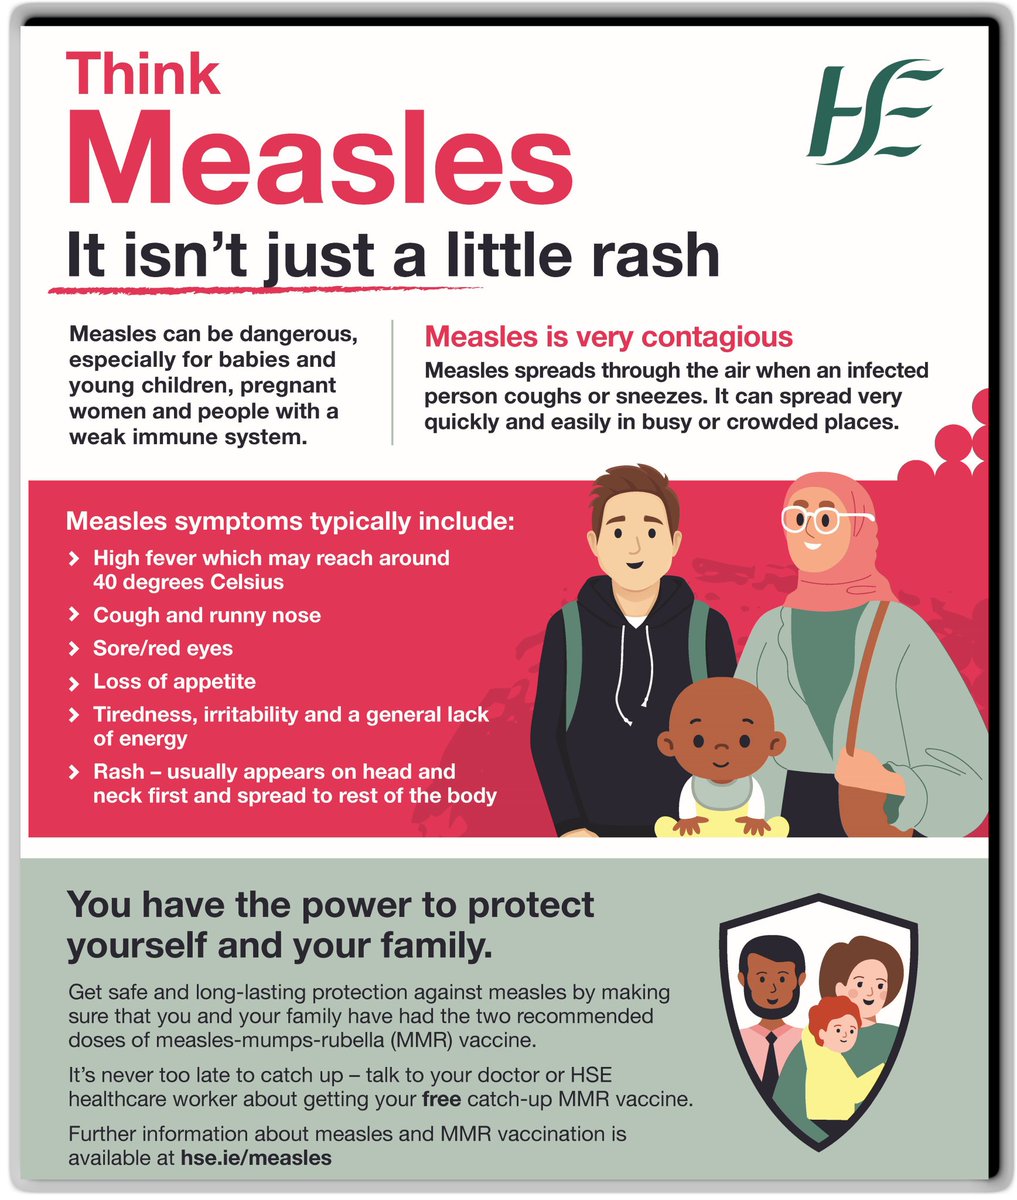 ⚠️Measles spreads quickly and easily. ⚠️Measles can cause serious illness. 💉The MMR vaccine is extremely effective at giving safe and long-lasting protection. 💉We encourage anyone who missed their vaccine to get vaccinated now. ➡️Visit hse.ie/measles for information